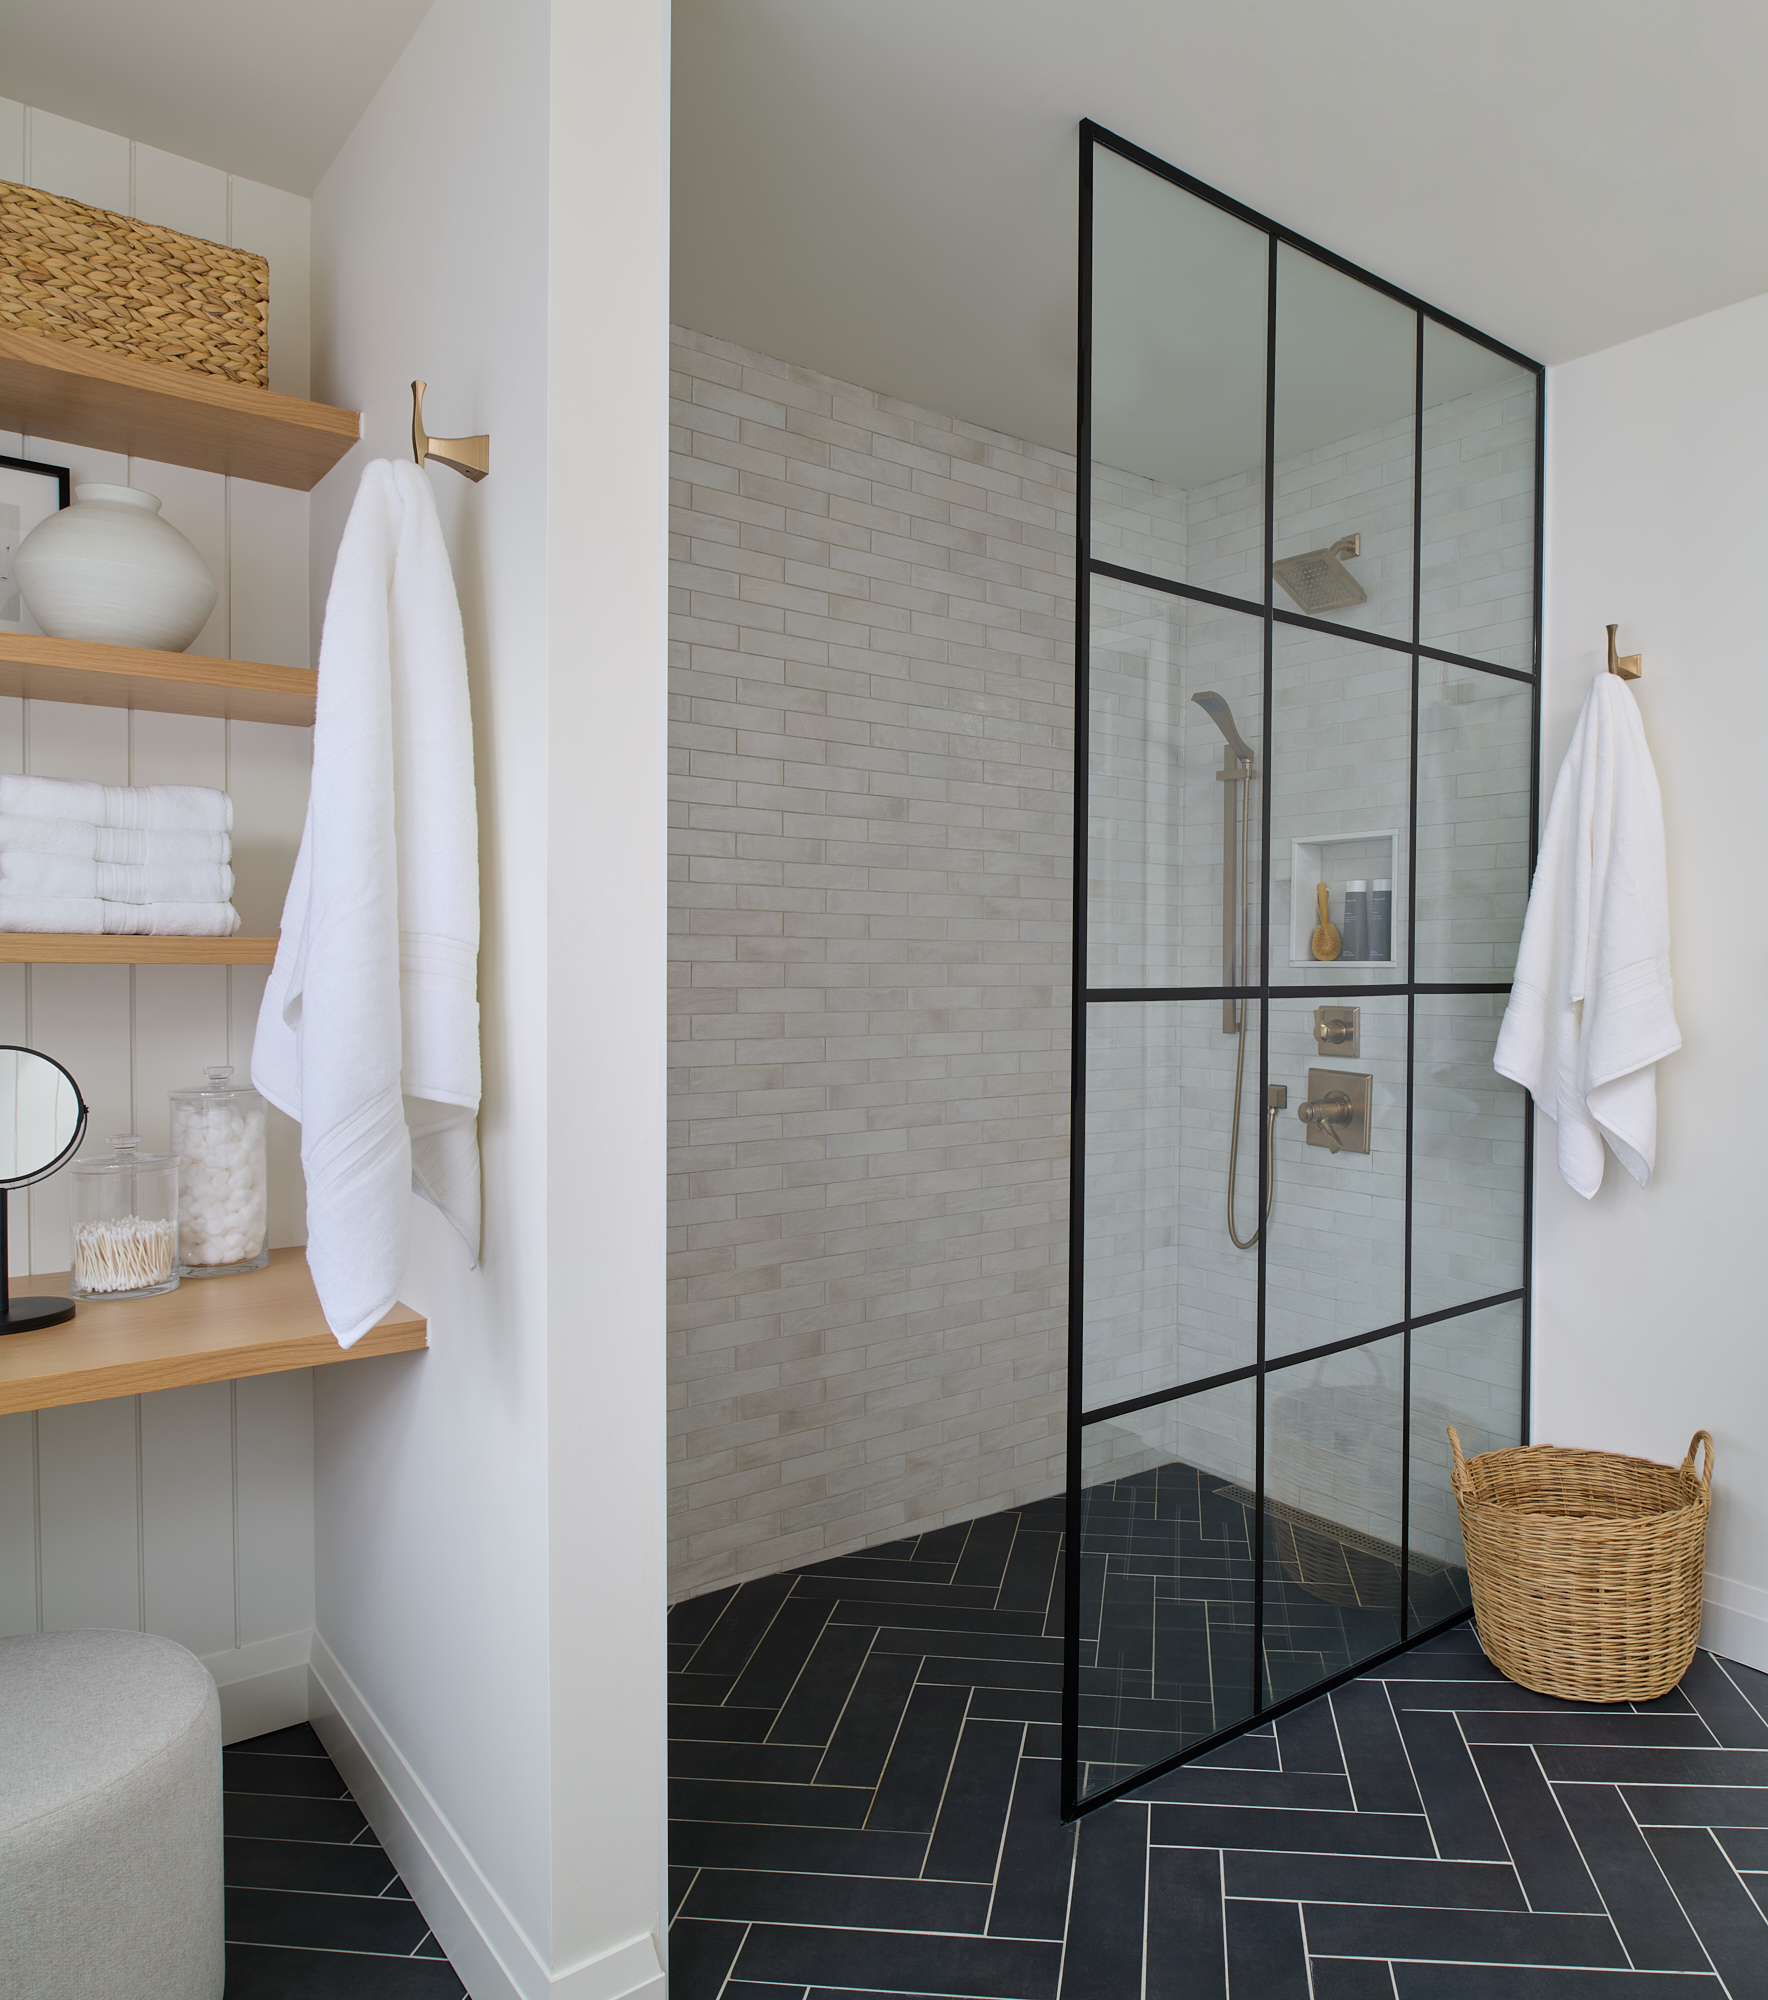 bathroom interior designed with black herringbone floor tile, subway tiled wall and shower glass with black iron frame 